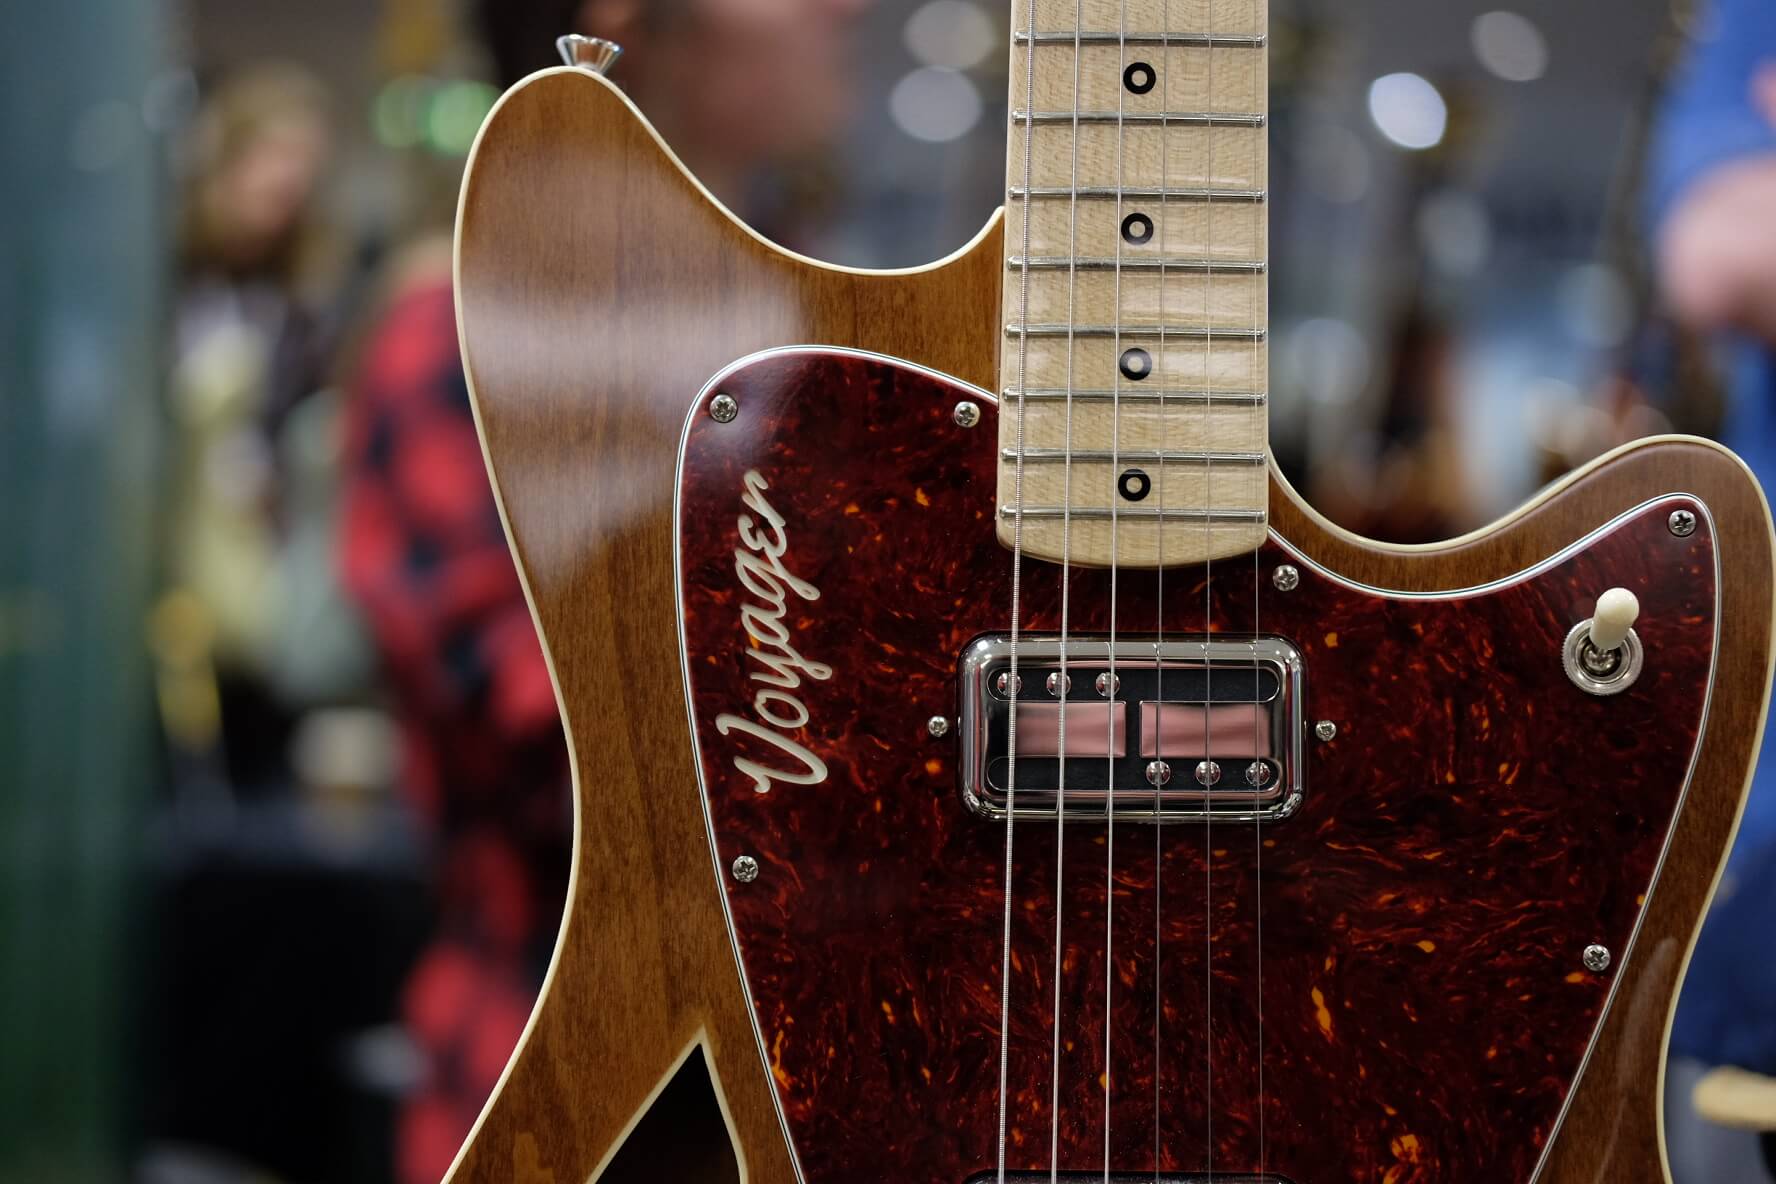 In Pictures: The London International Guitar Show 2018